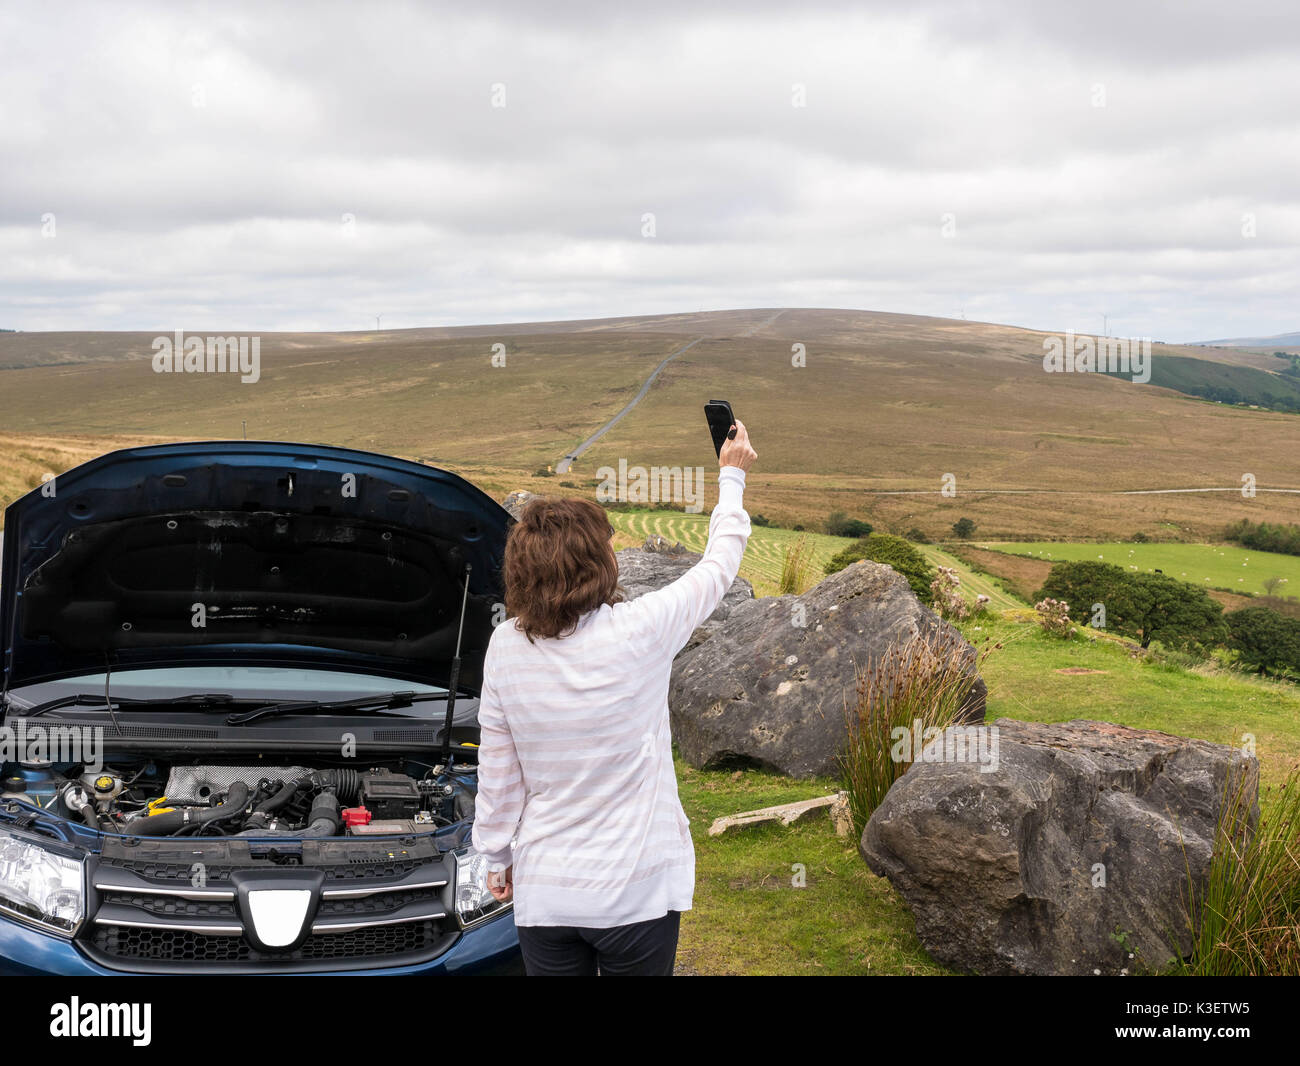 Mature, senior, attractive lady stranded in countryside with broken down care trying to get a cell phone signal to call for help. Stock Photo